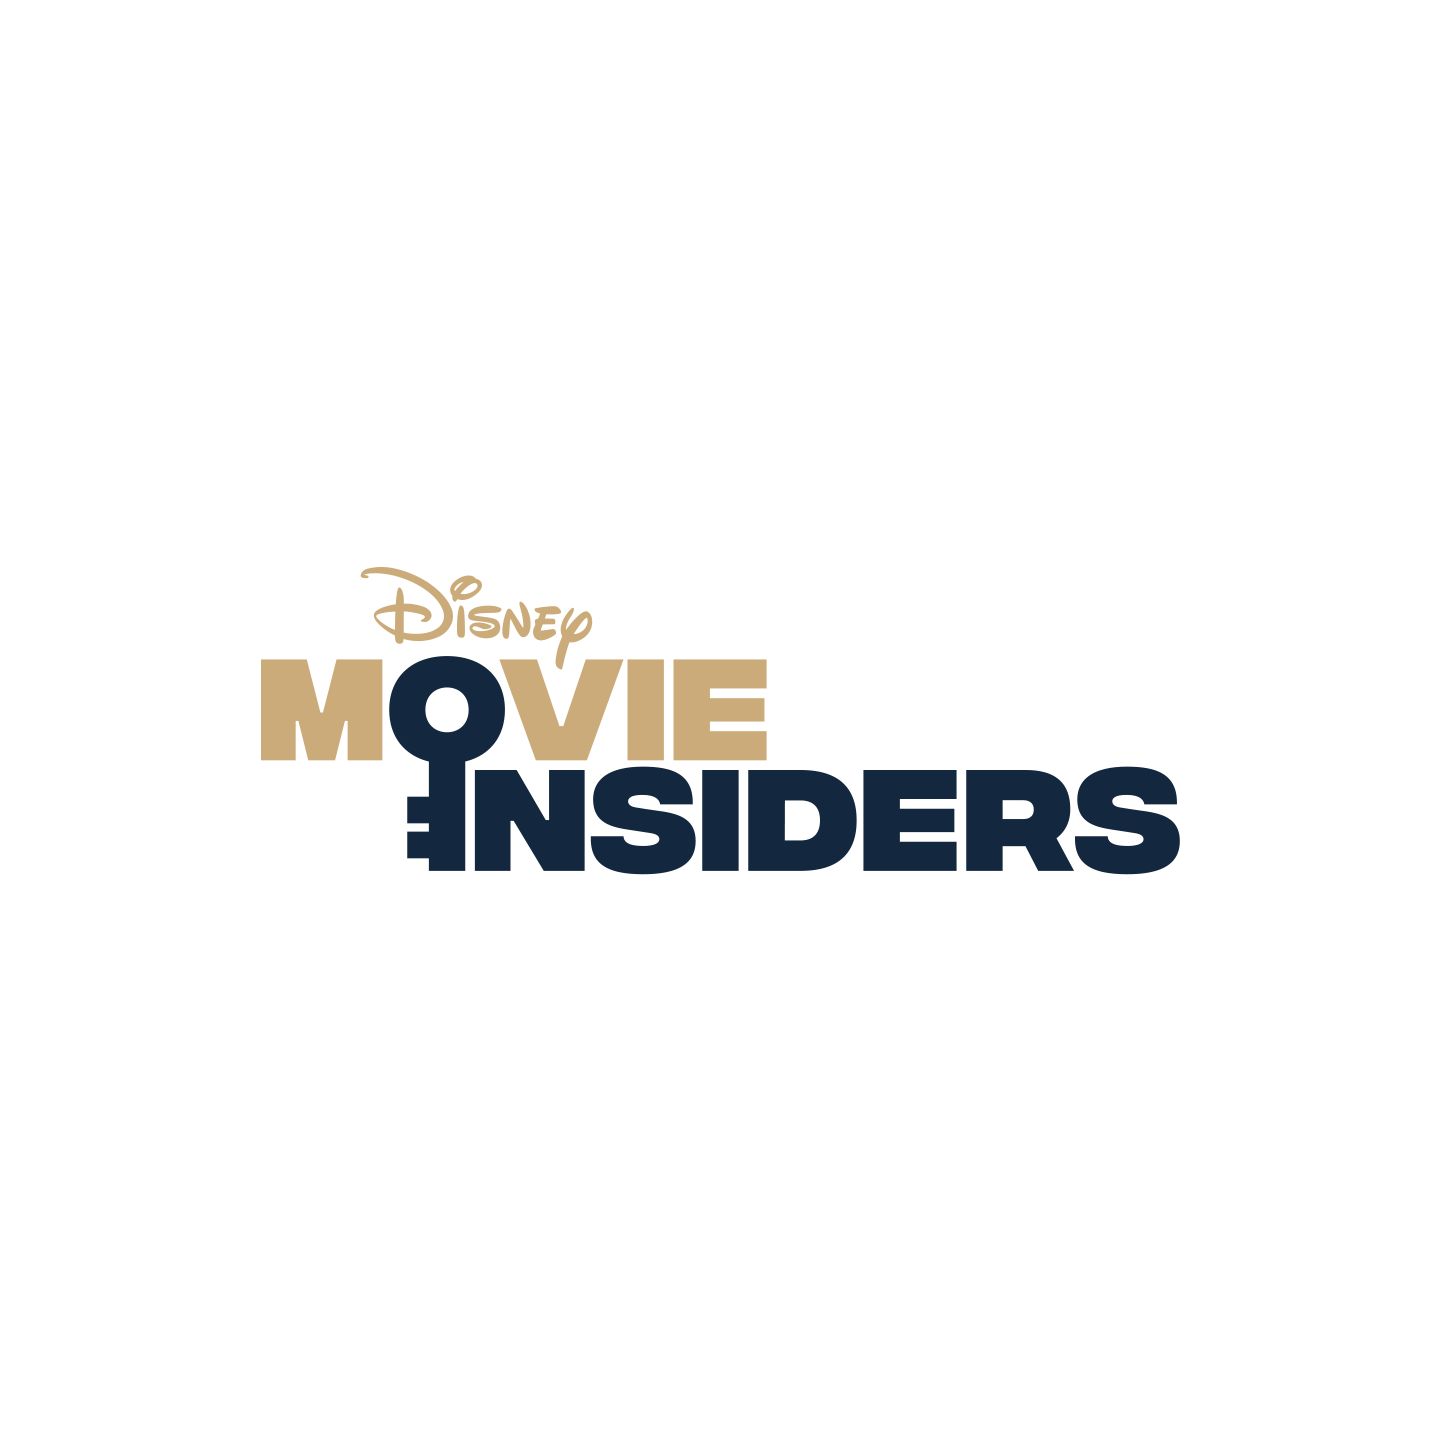 Disney Movie Insiders Presents - AN INSIDER LOOK AT DUG DAYS - Writer and Director Bob Peterson joins us to talk about Pixar Animation Studio's latest series on Disney+. LISTEN NOW